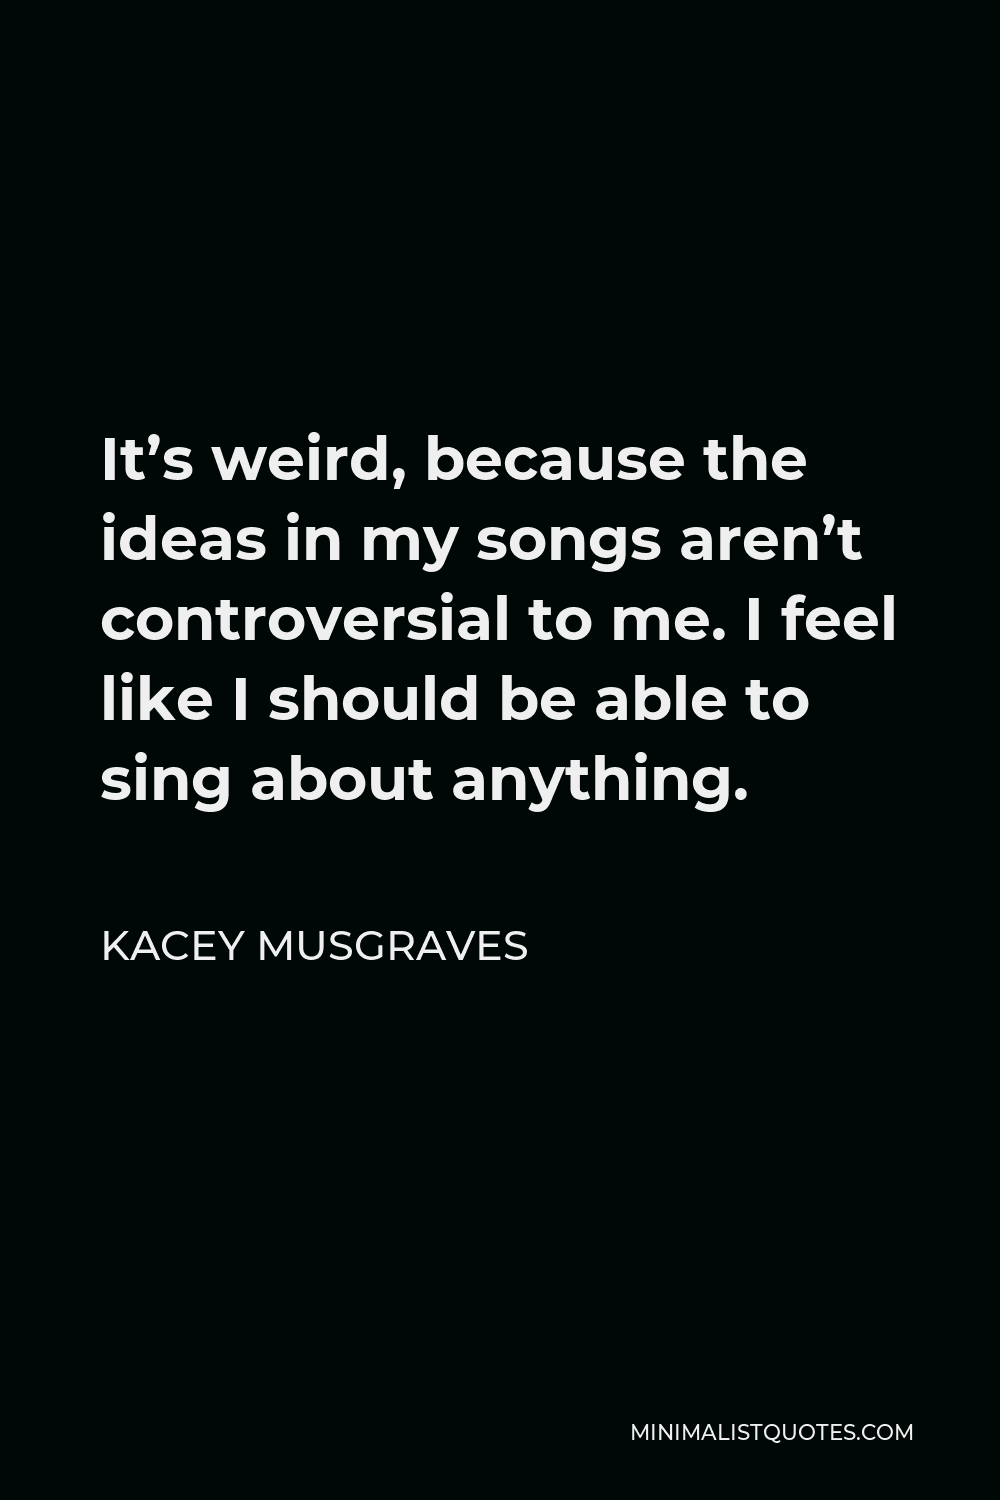 Kacey Musgraves Quote The More Country That My Music Gets The Less It Fits Into The Country